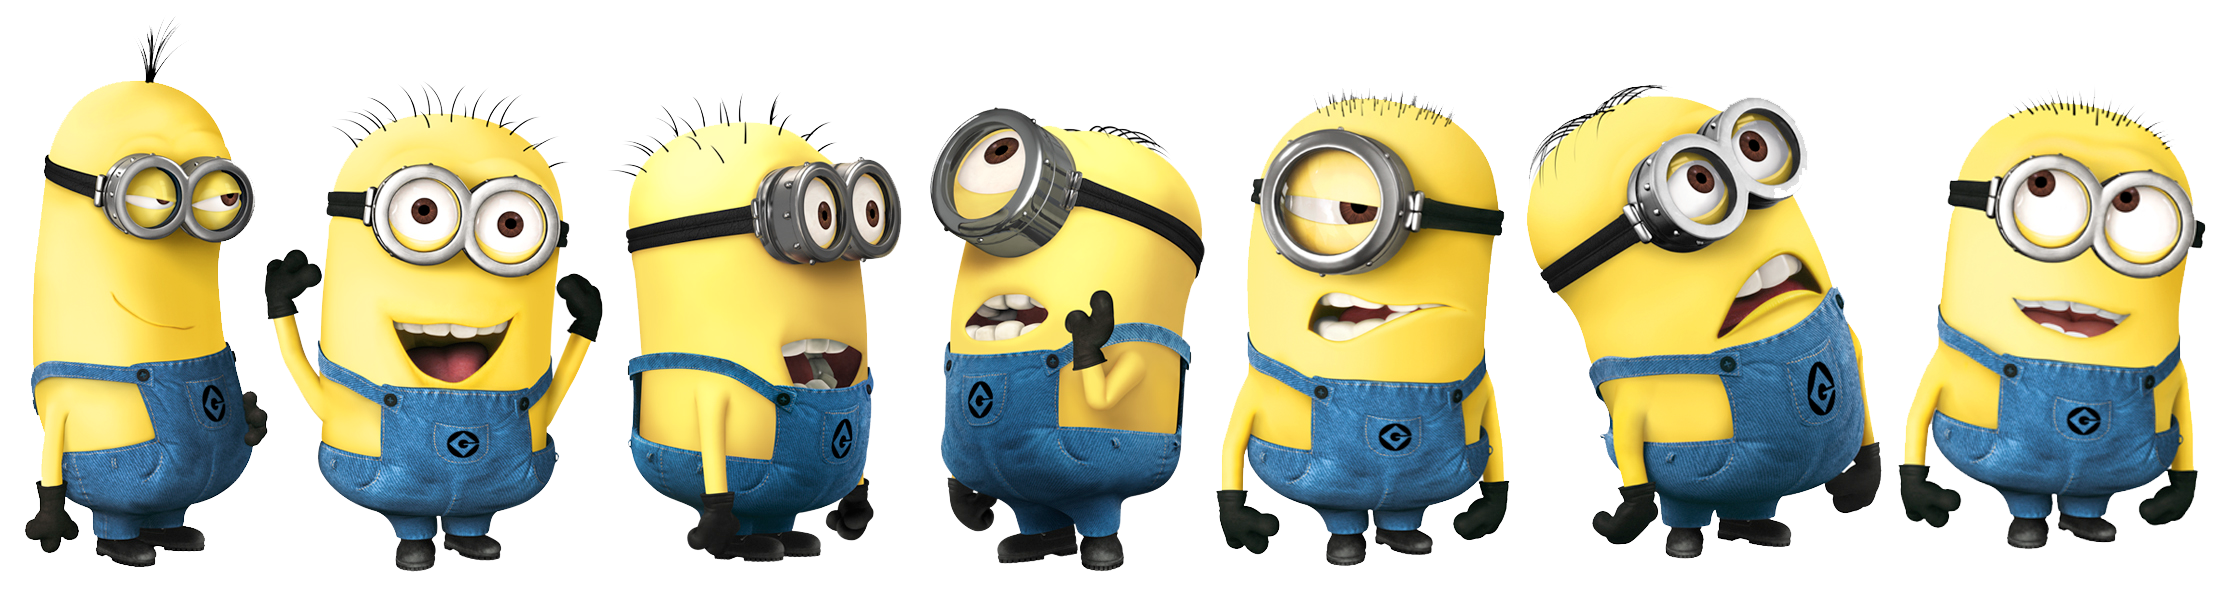 Group Minions Free Transparent Image HQ PNG Image